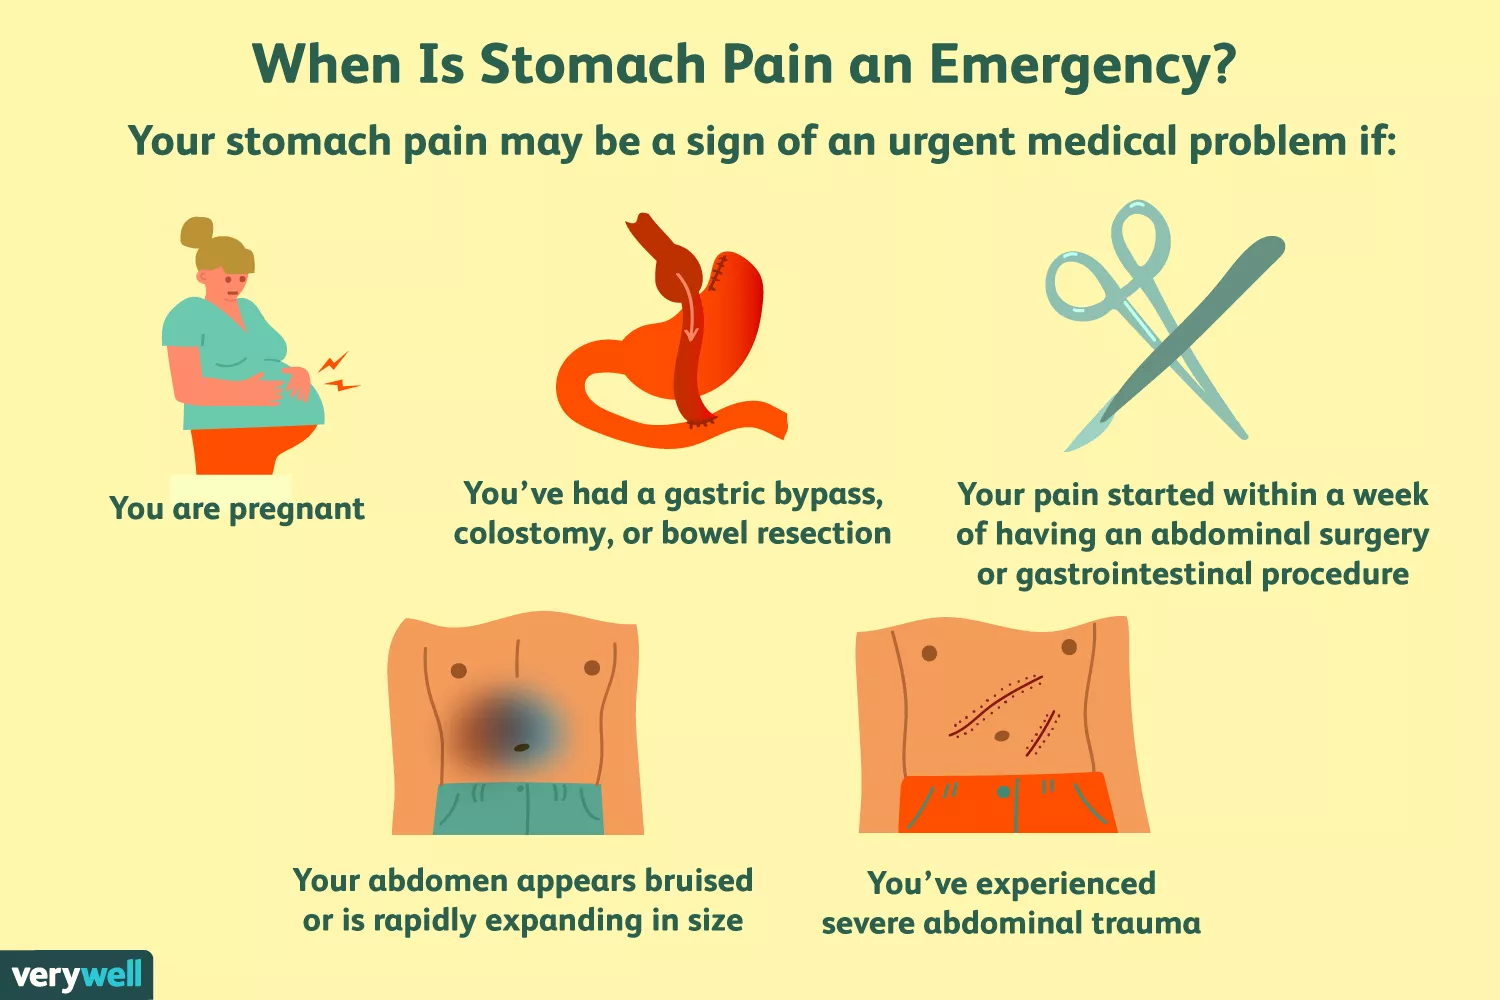 How Do I Know if My Stomach Pain Is Serious?